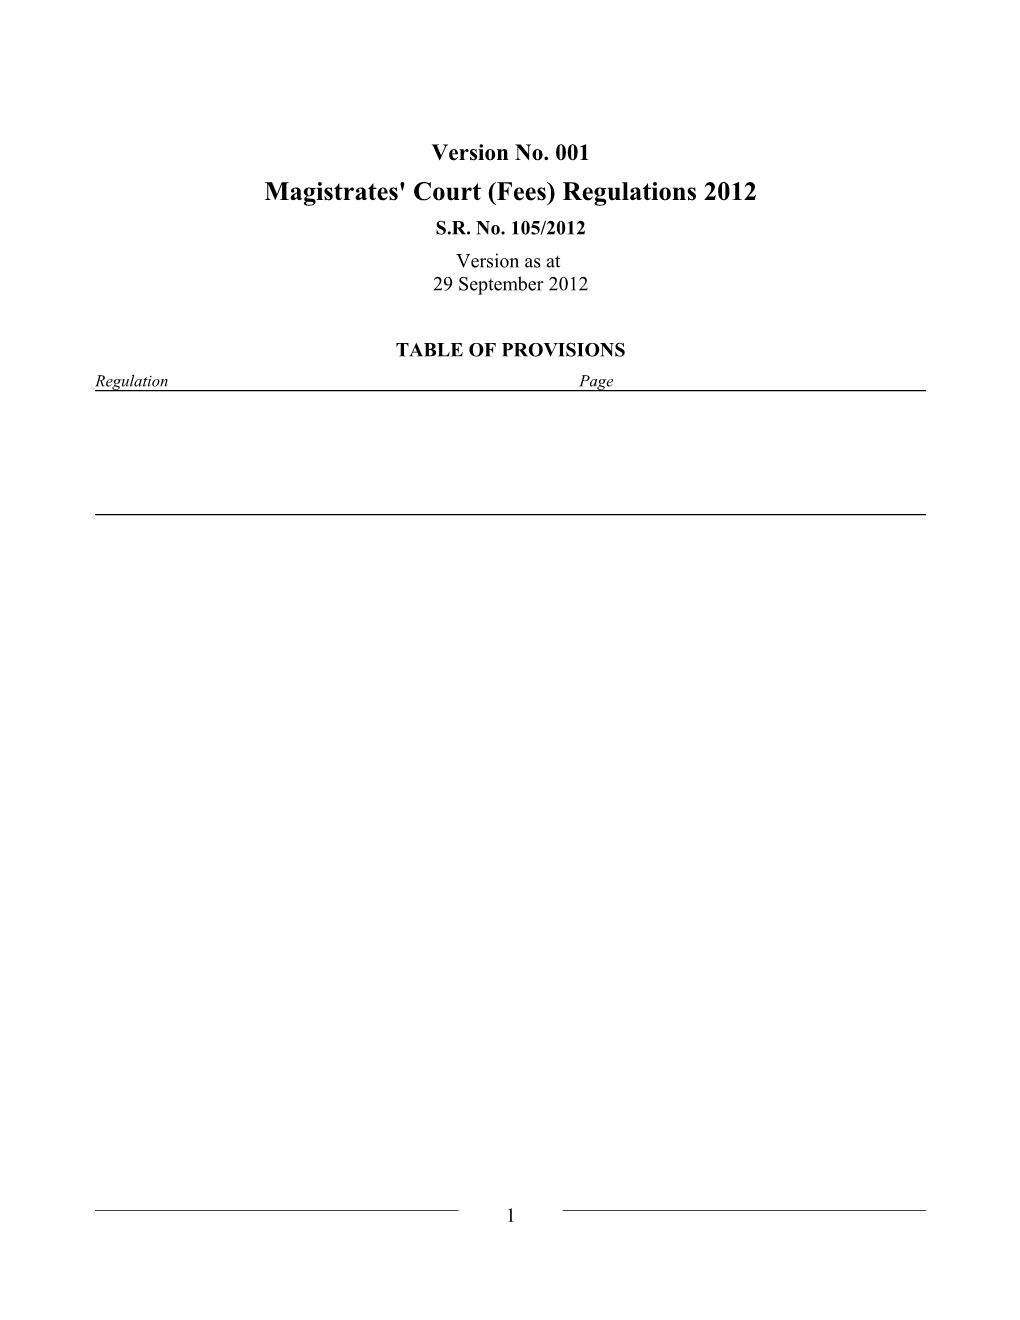 Magistrates' Court (Fees) Regulations 2012